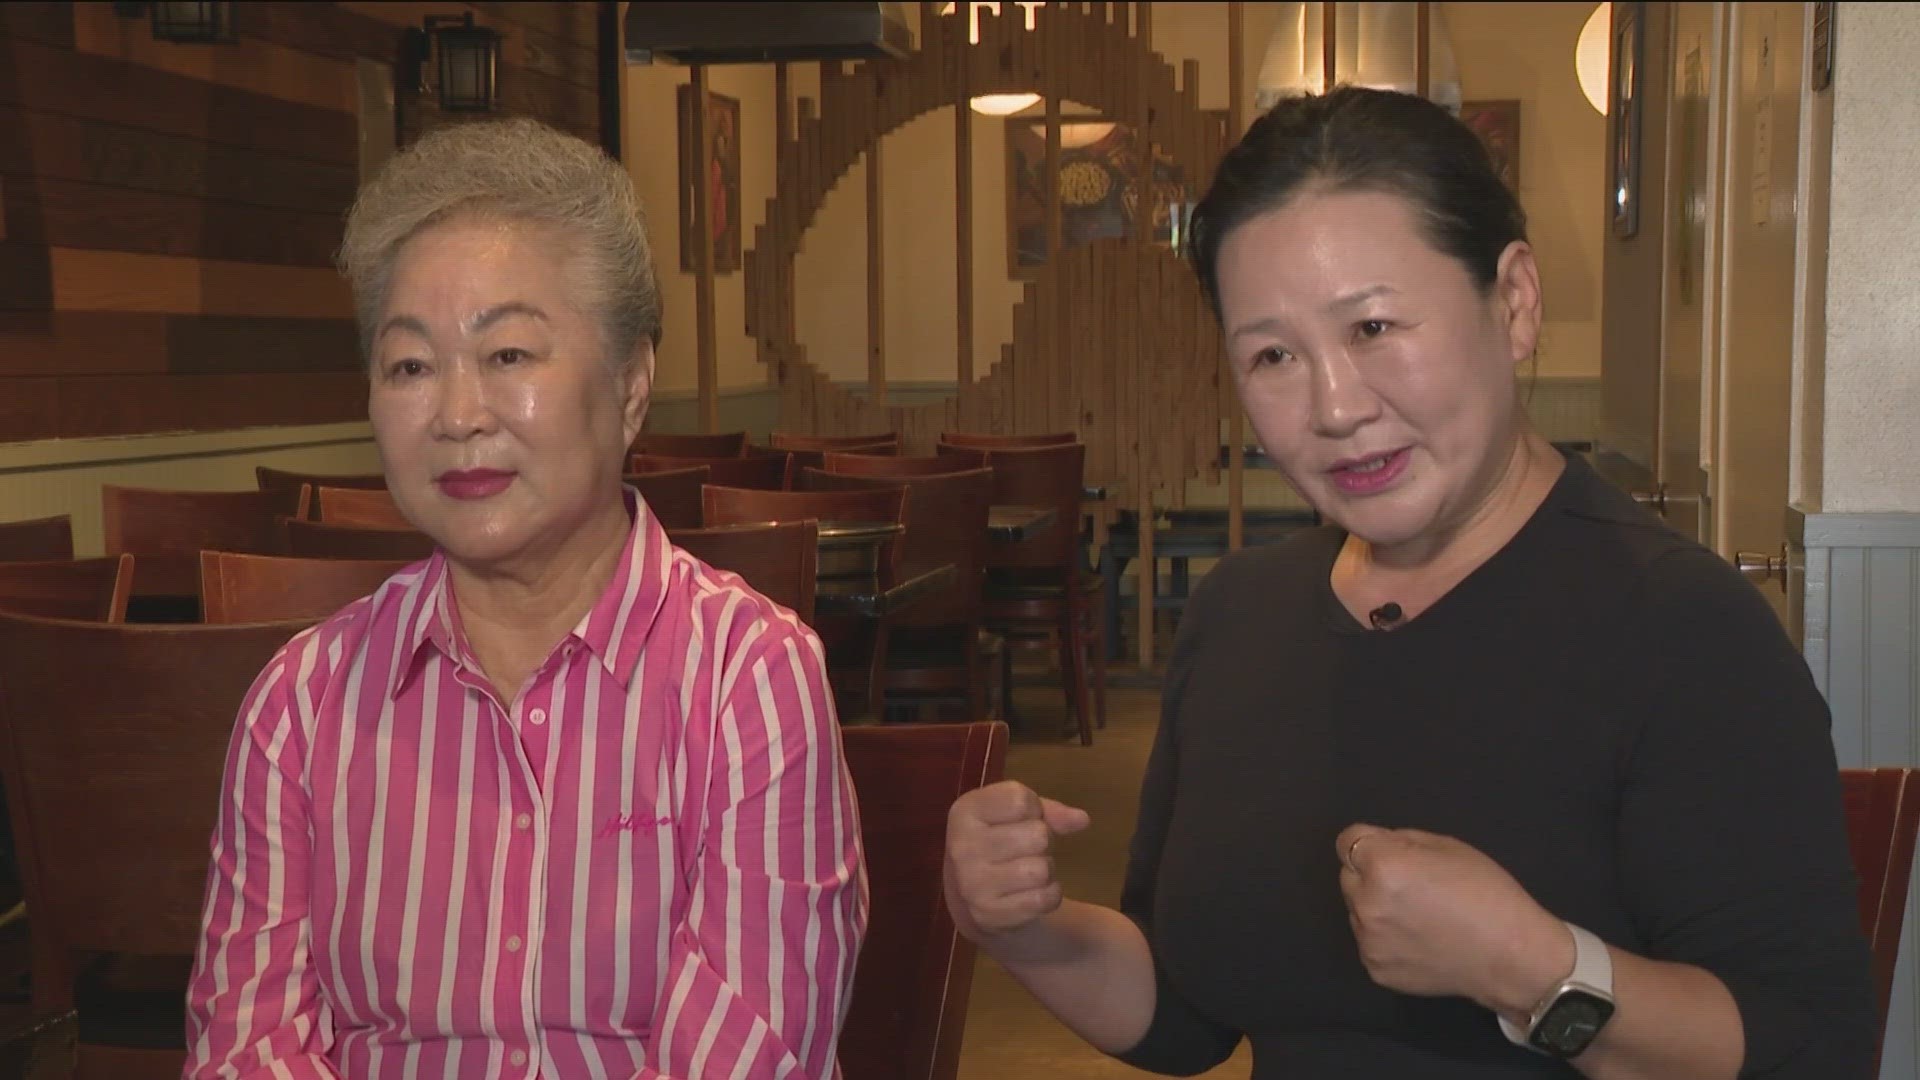 More than 177,000 people in Travis County are food insecure. One Korean restaurant in Austin wants to do its part to help.